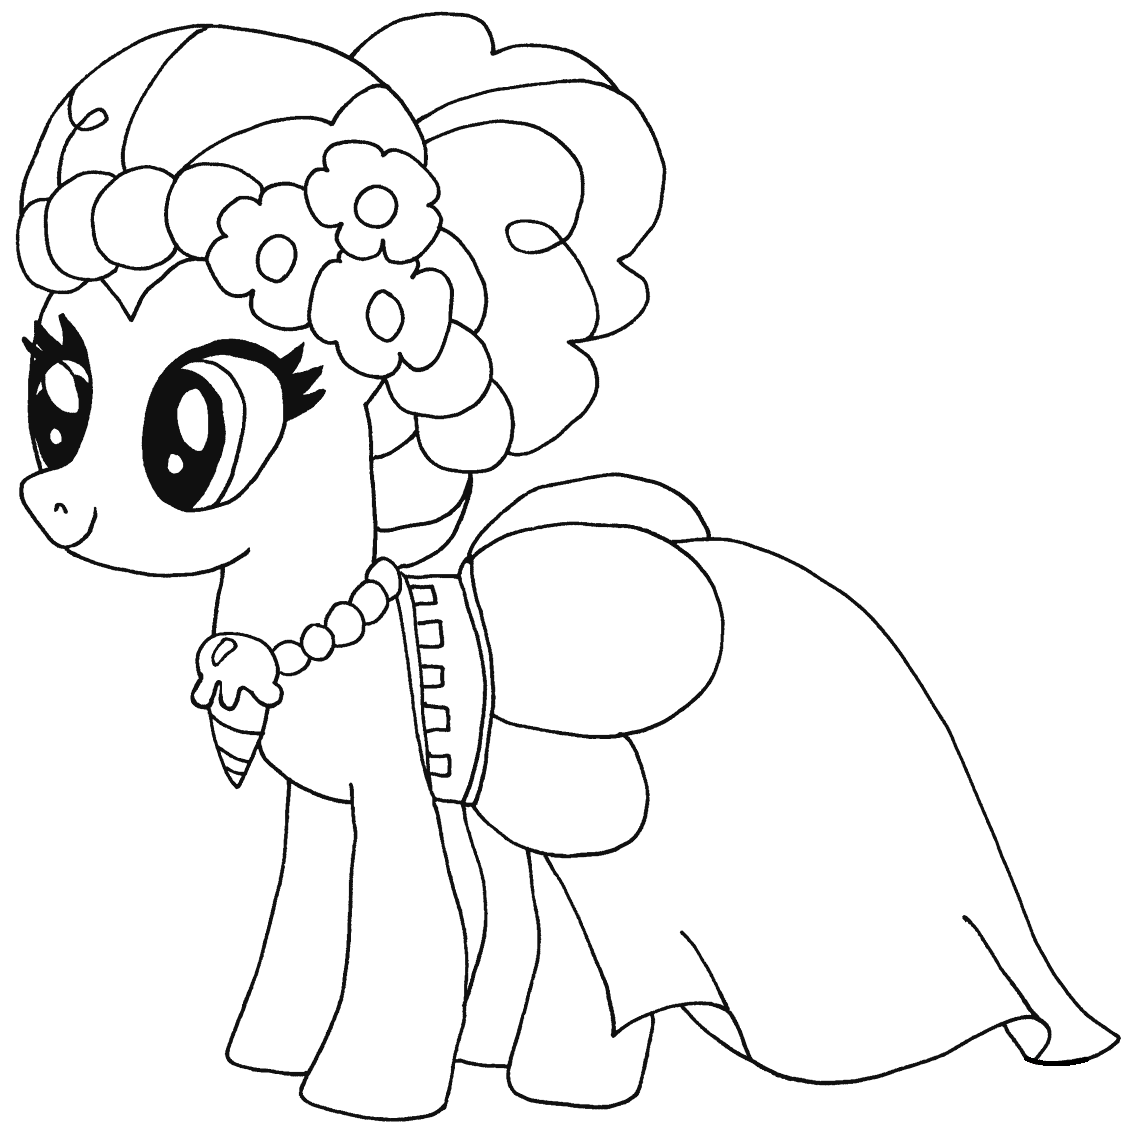 Lovely Pinkie Pie Coloring Page Free Printable Coloring Pages for Kids